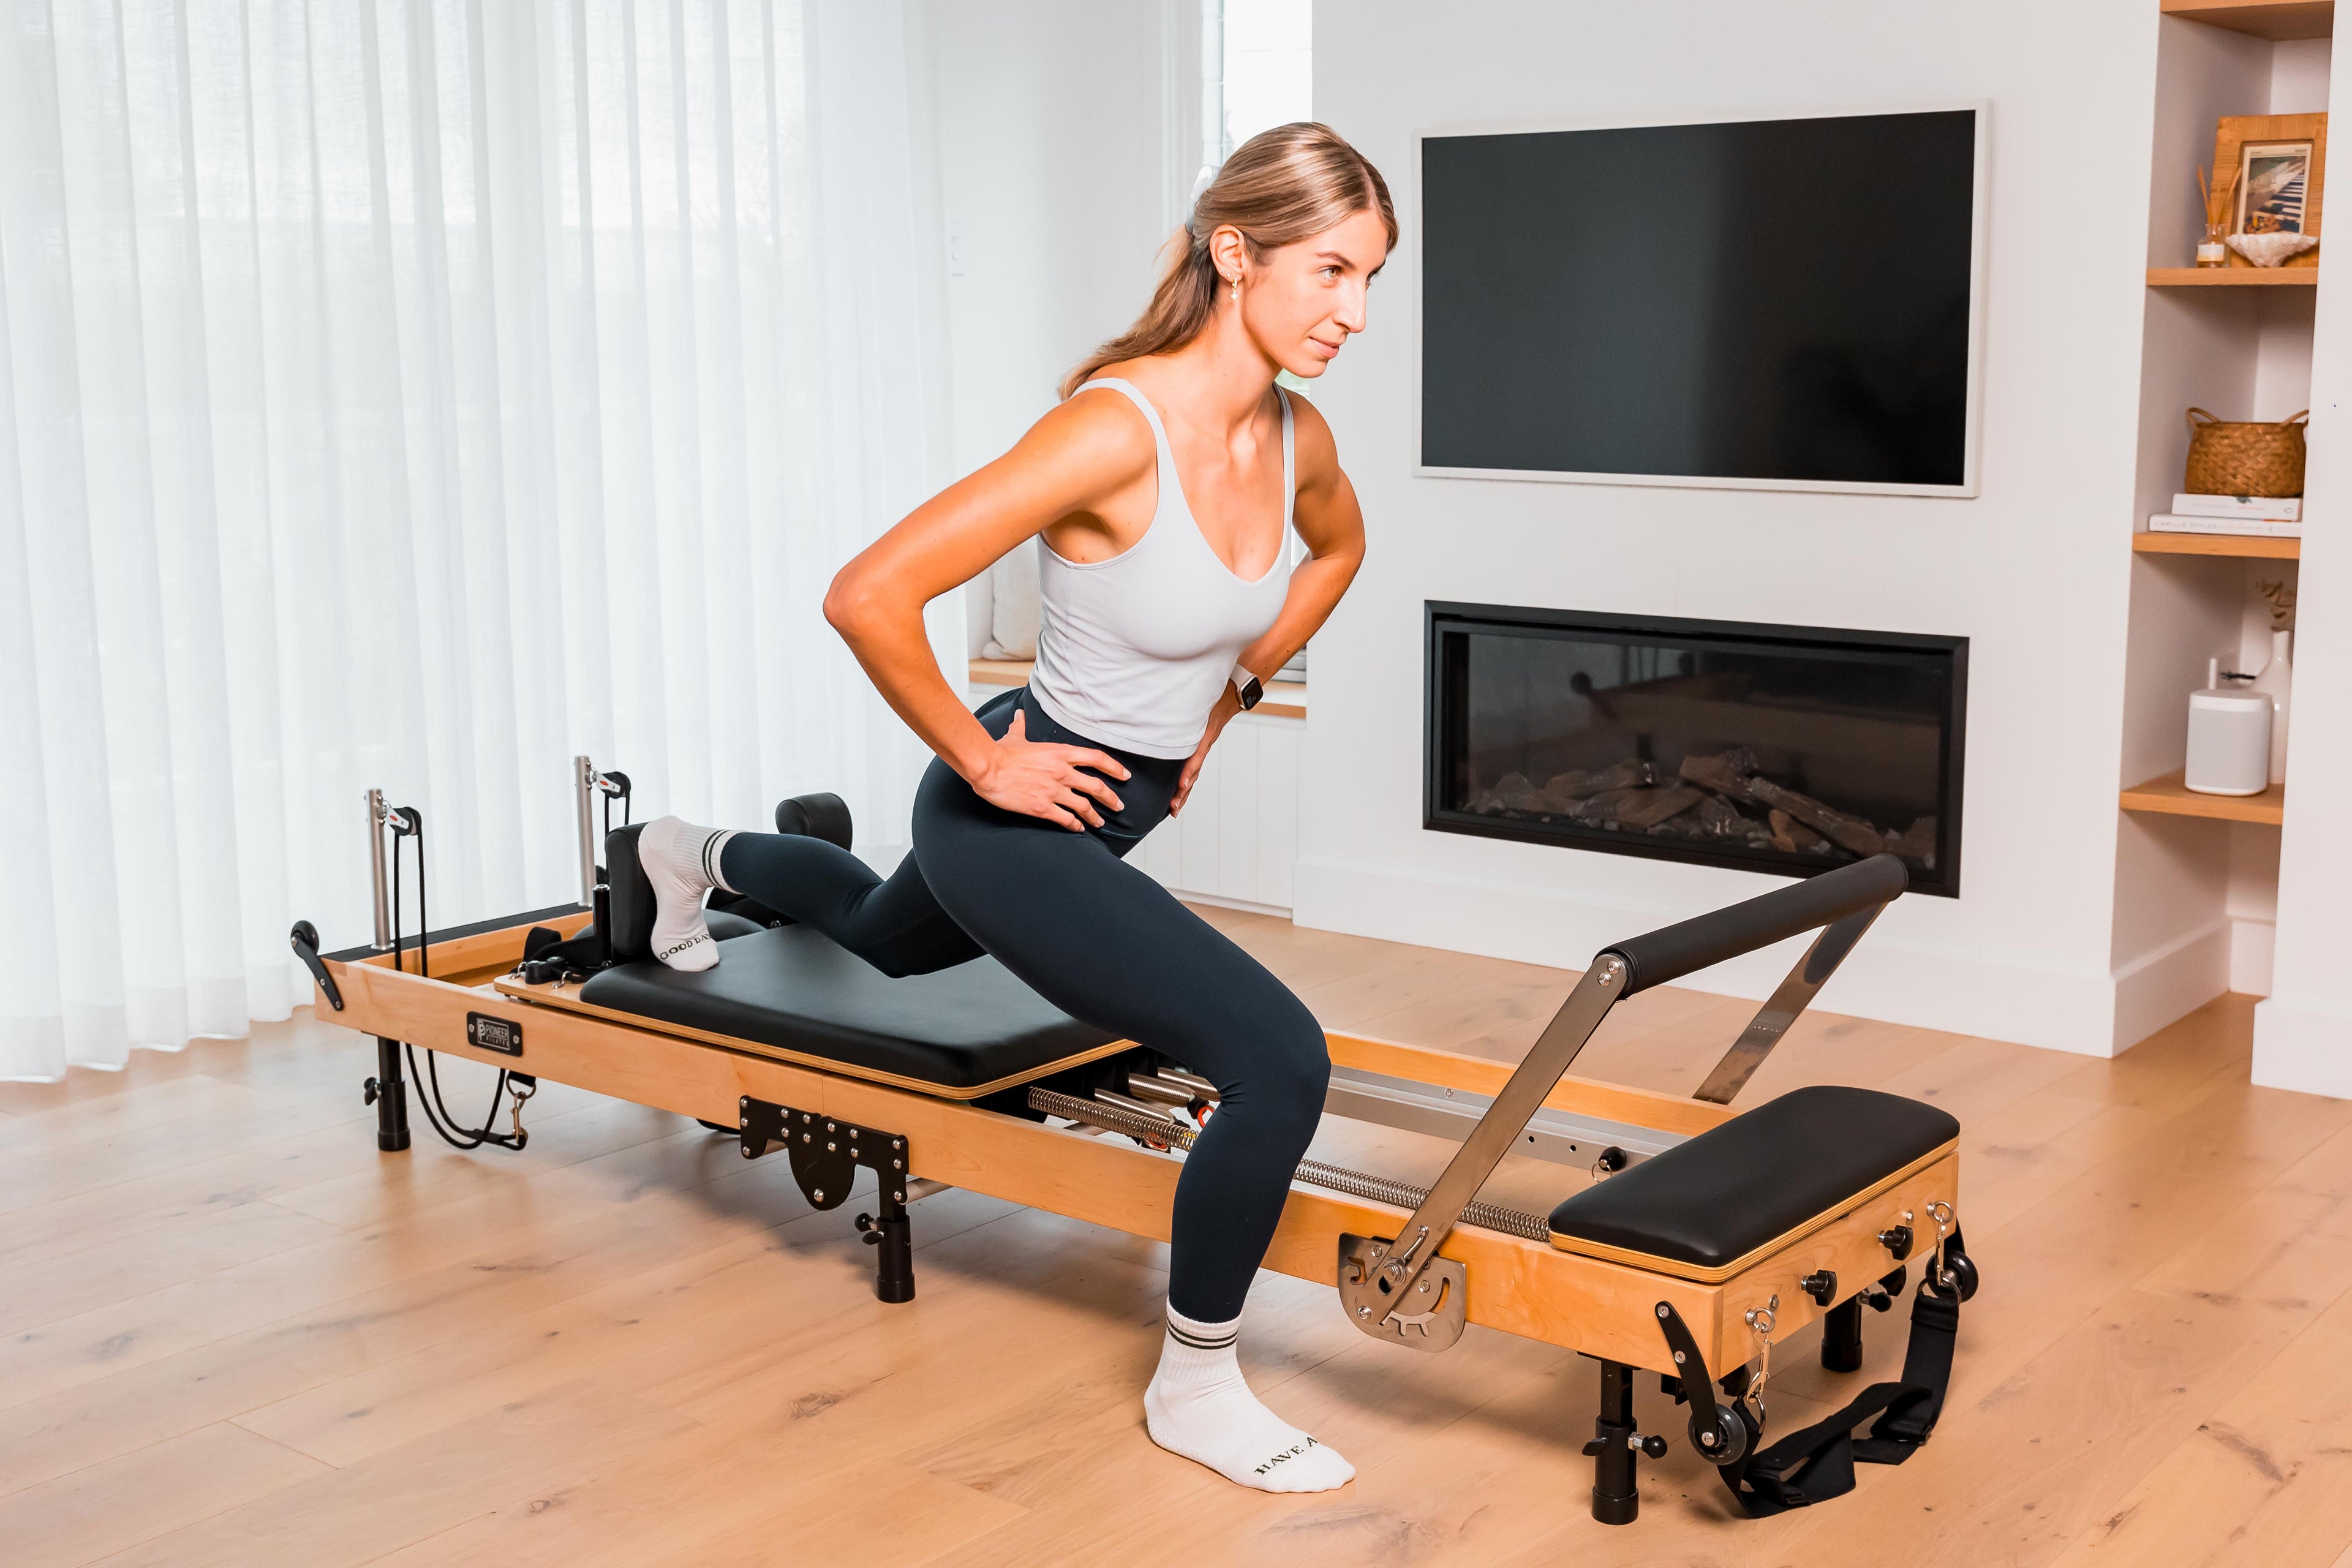 Foldable Pilates Reformer Machine, Pilates Machine Equipment for Strength  Training, Home Fitness Equipment, Suitable for Beginners and Intermediate